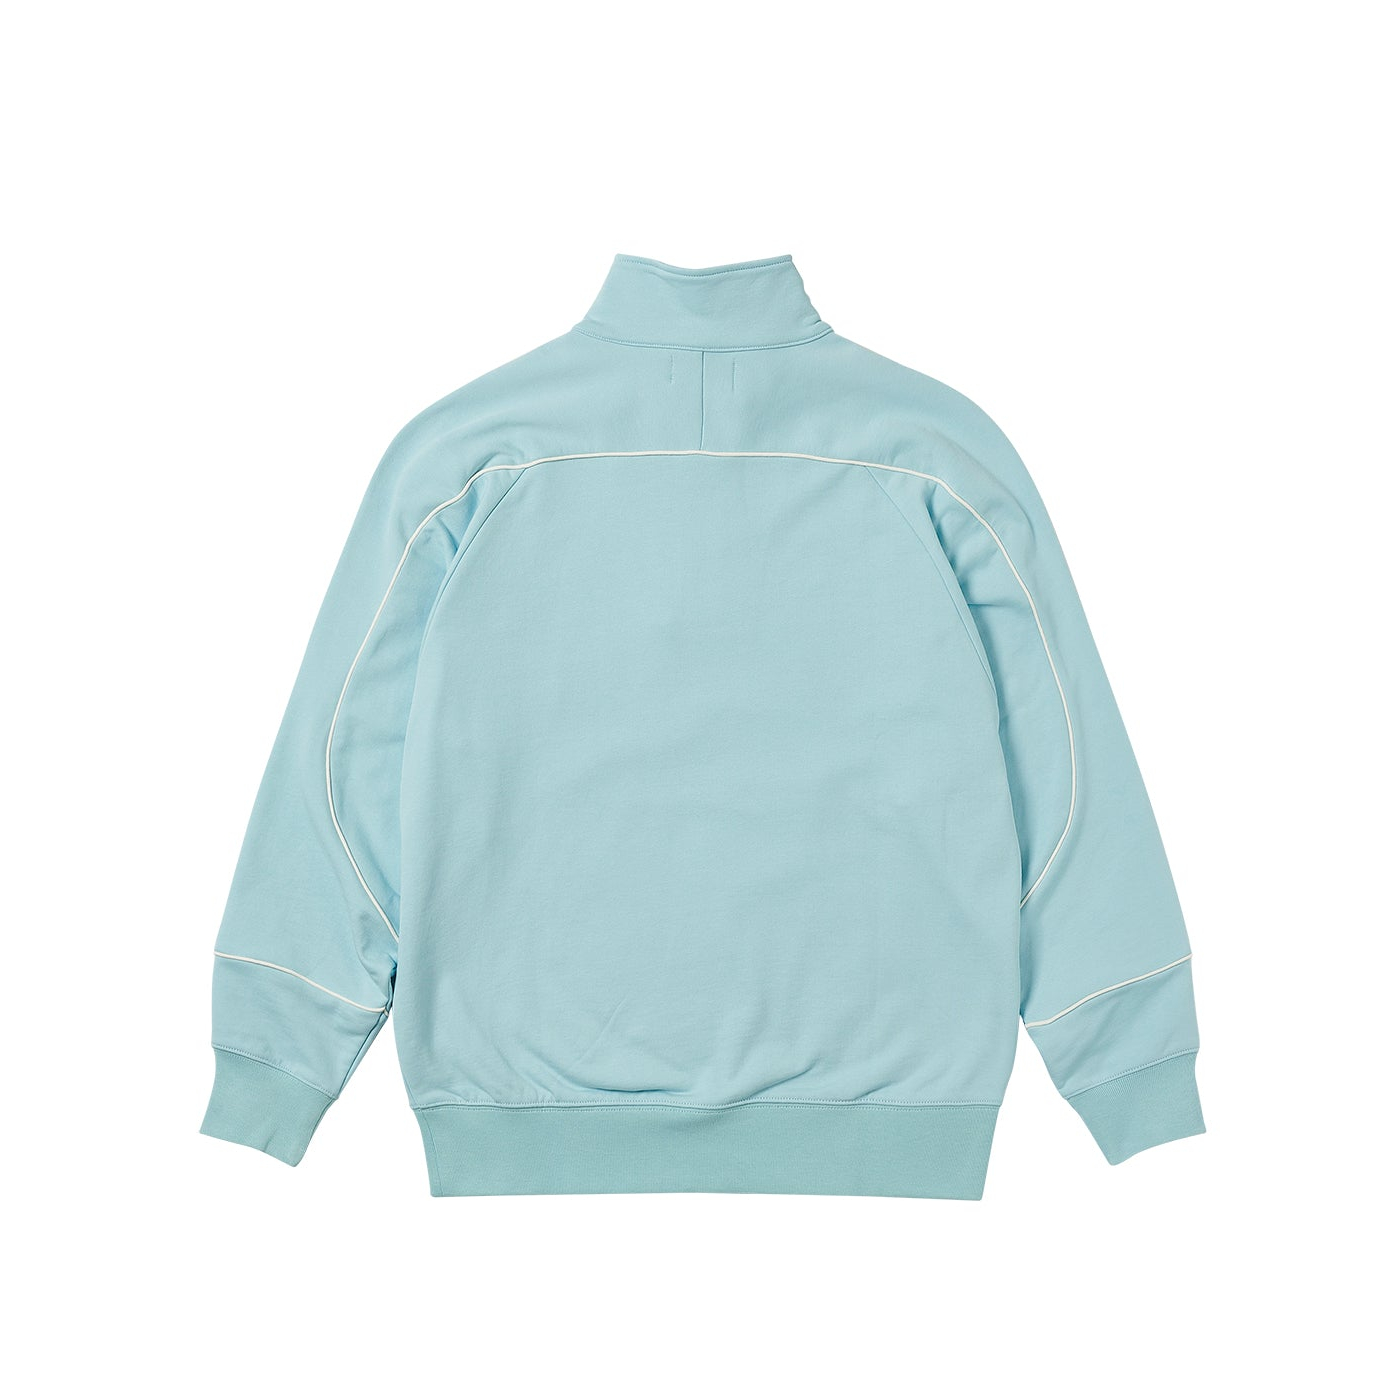 Thumbnail SPORT PIPED 1/4 ZIP CRYSTALISED BLUE one color